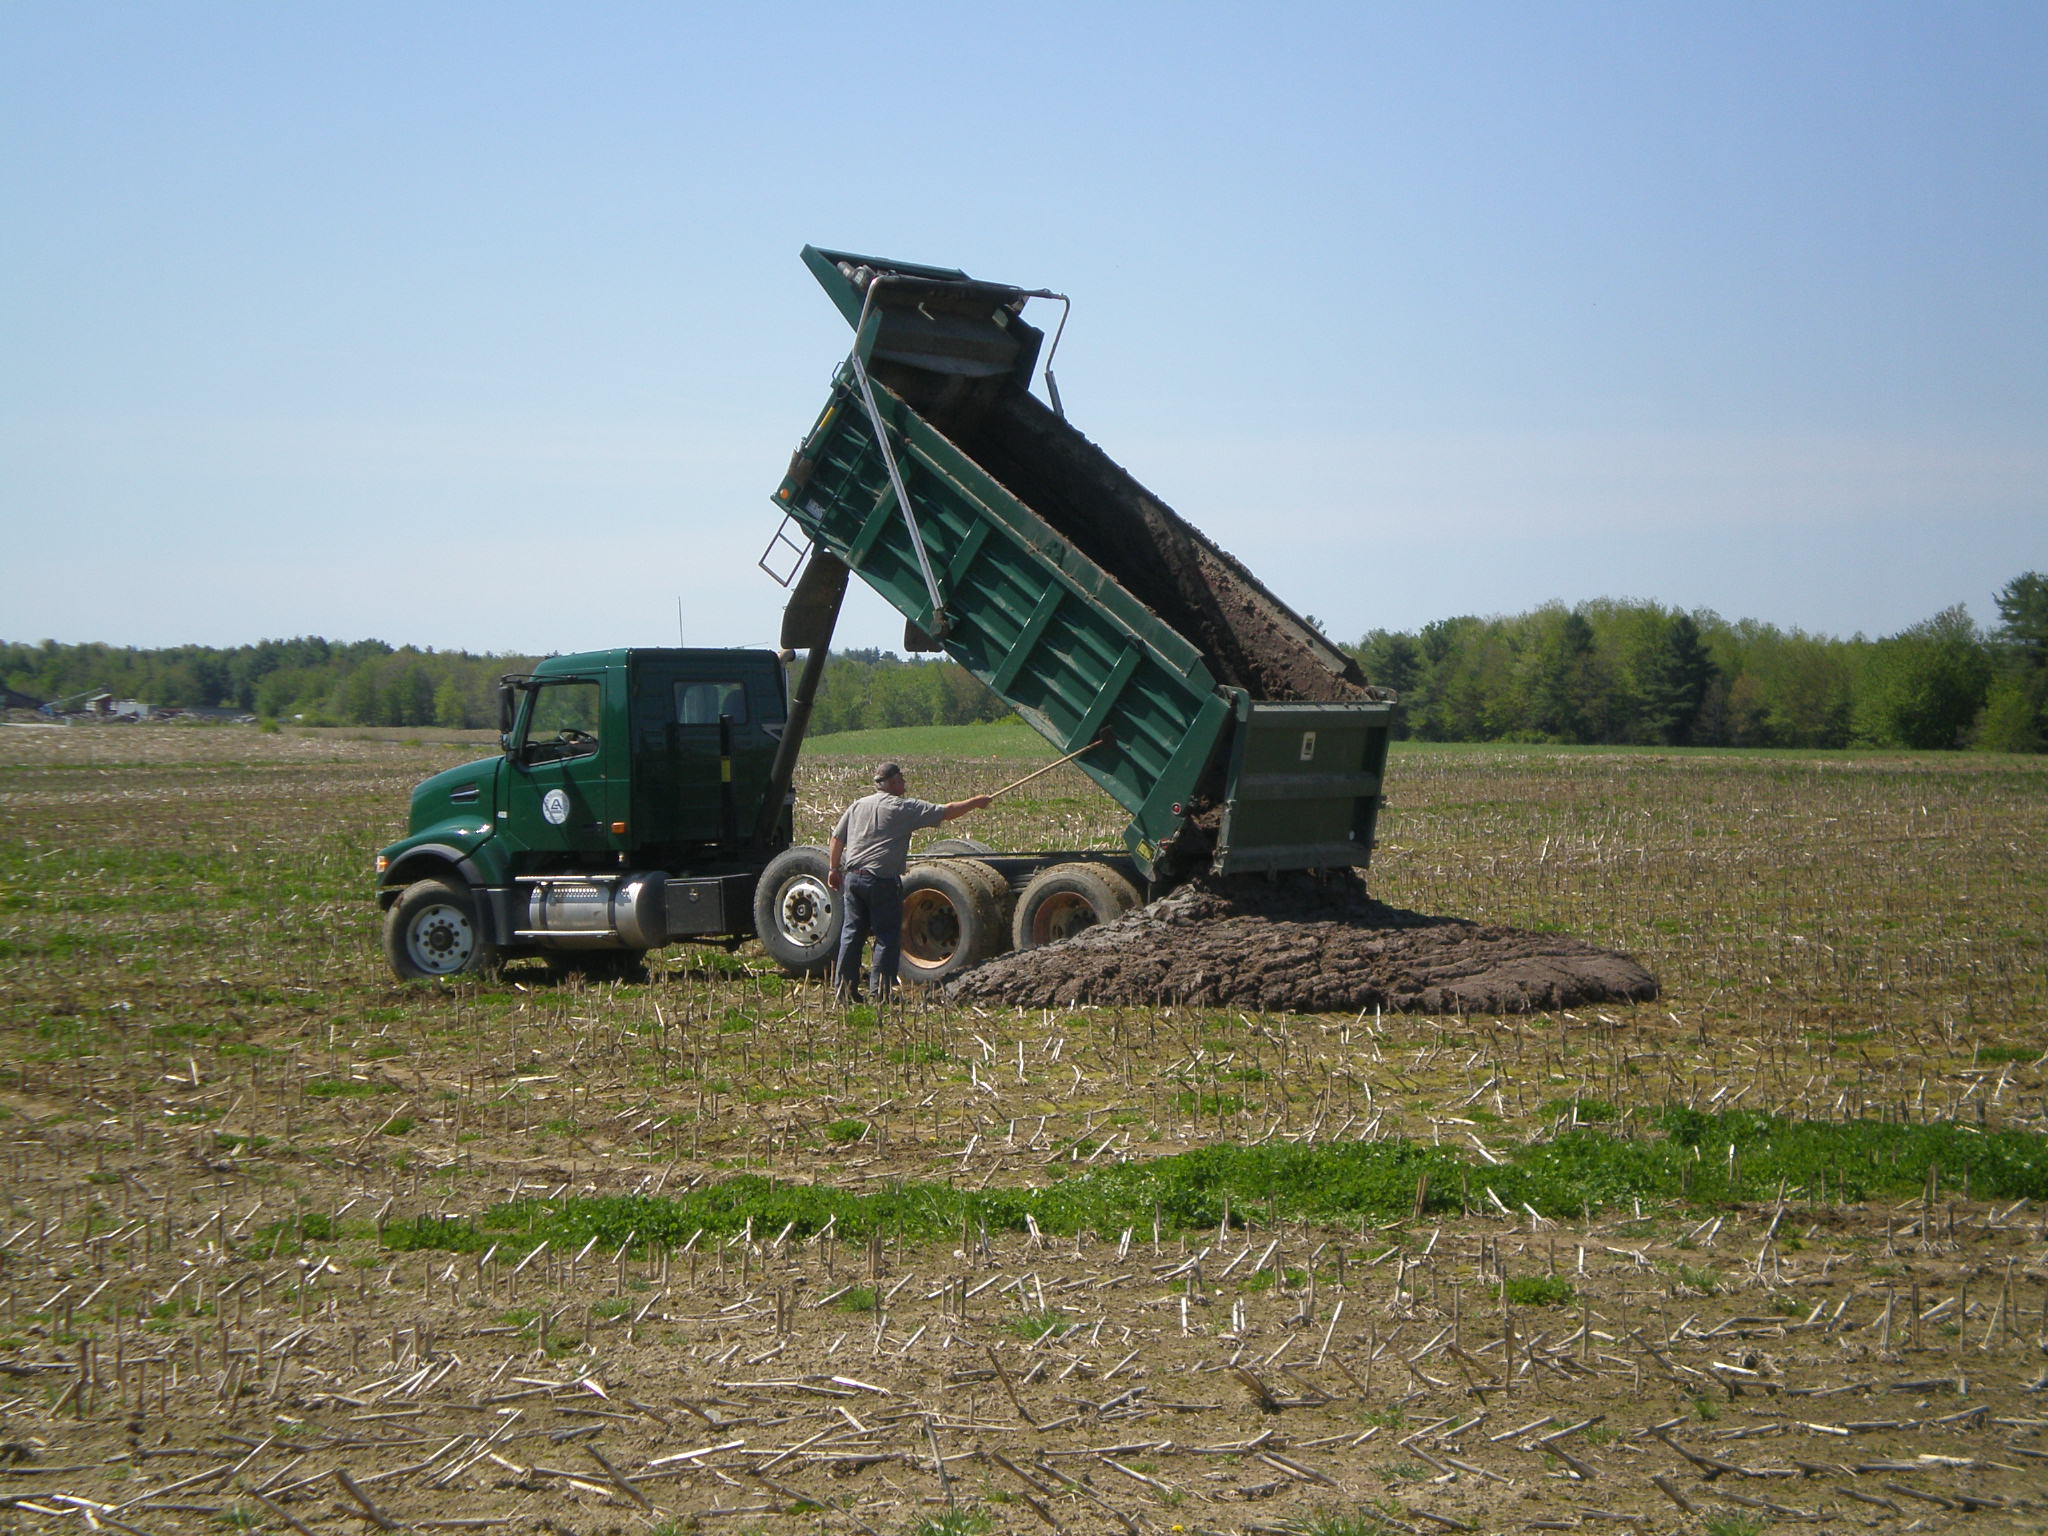  Delivering Class B biosolids to corn field, Quebec. 